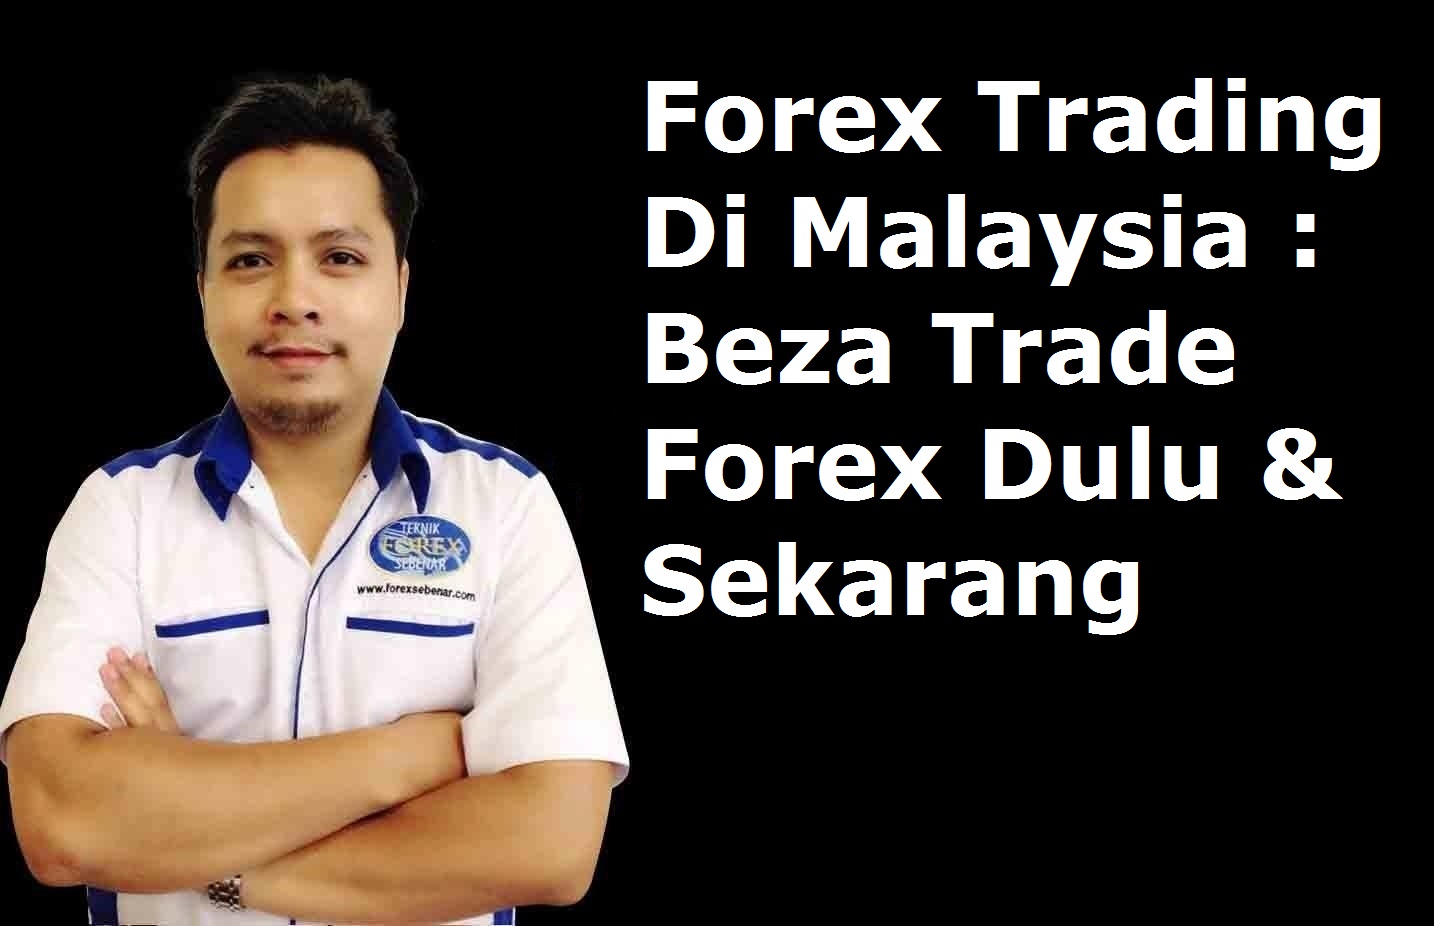 Fxunited forex malaysia blog how do you make money with bitcoin mining